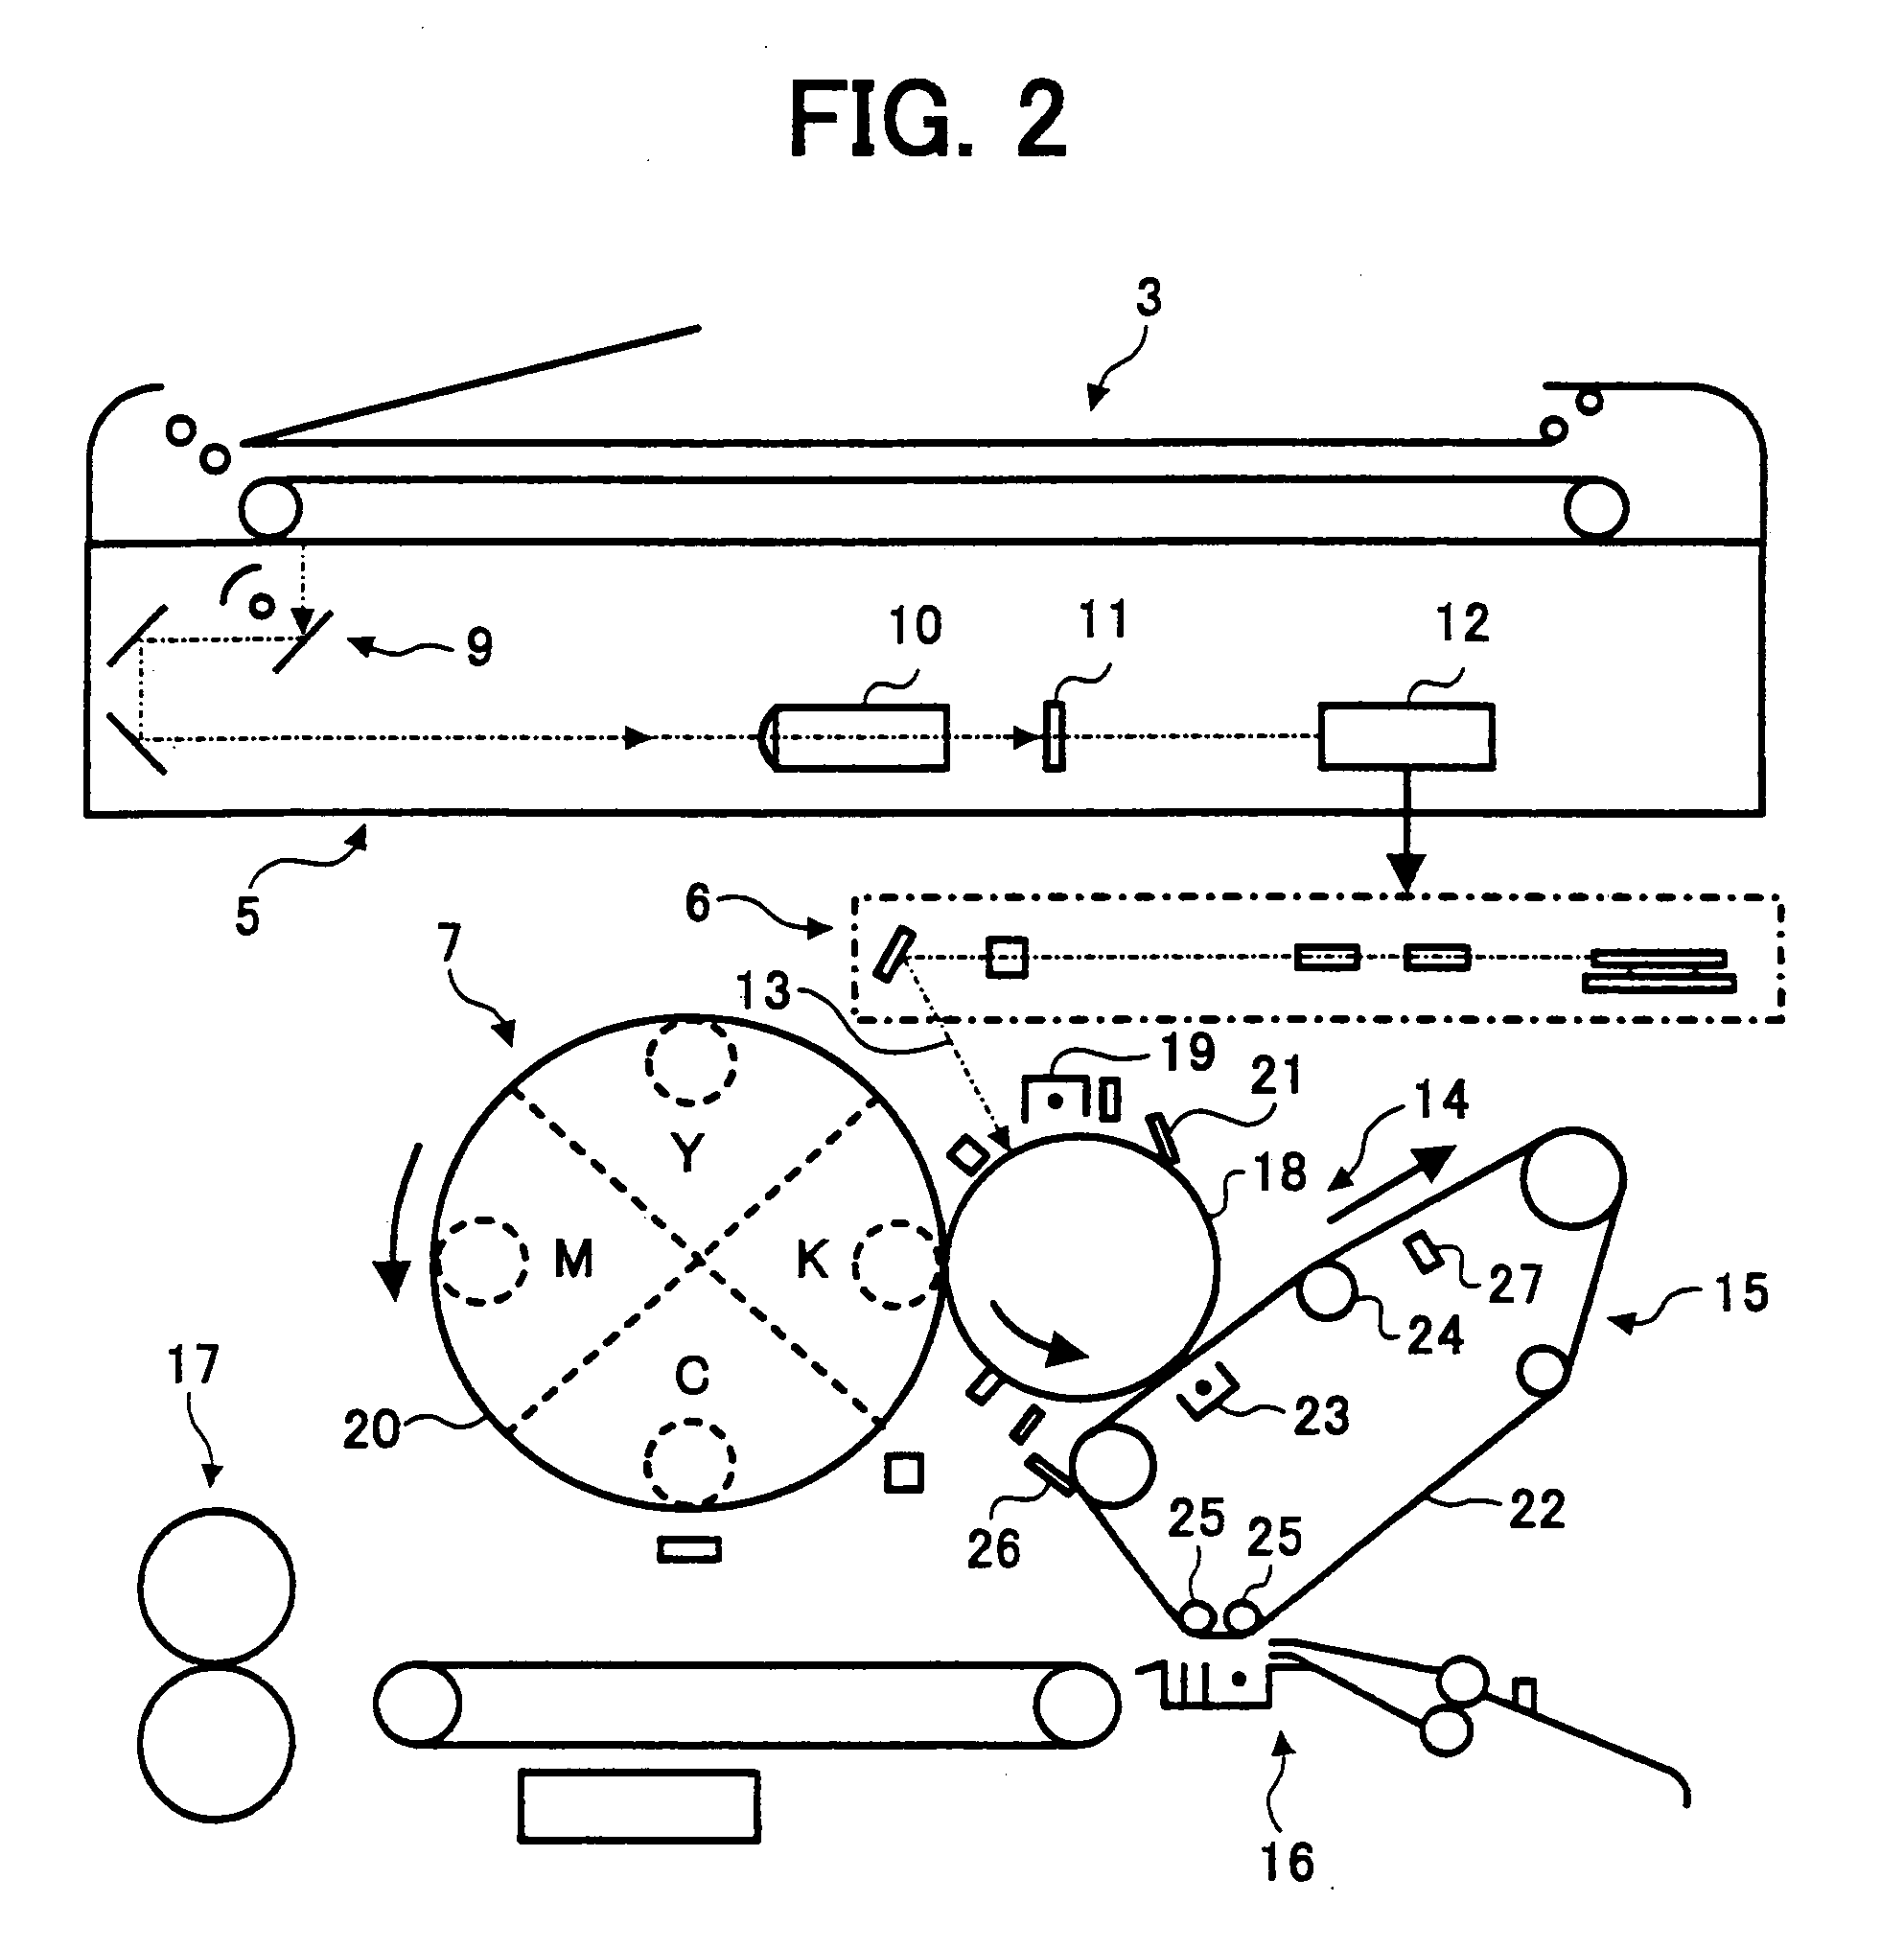 Power supply control device for an image forming apparatus